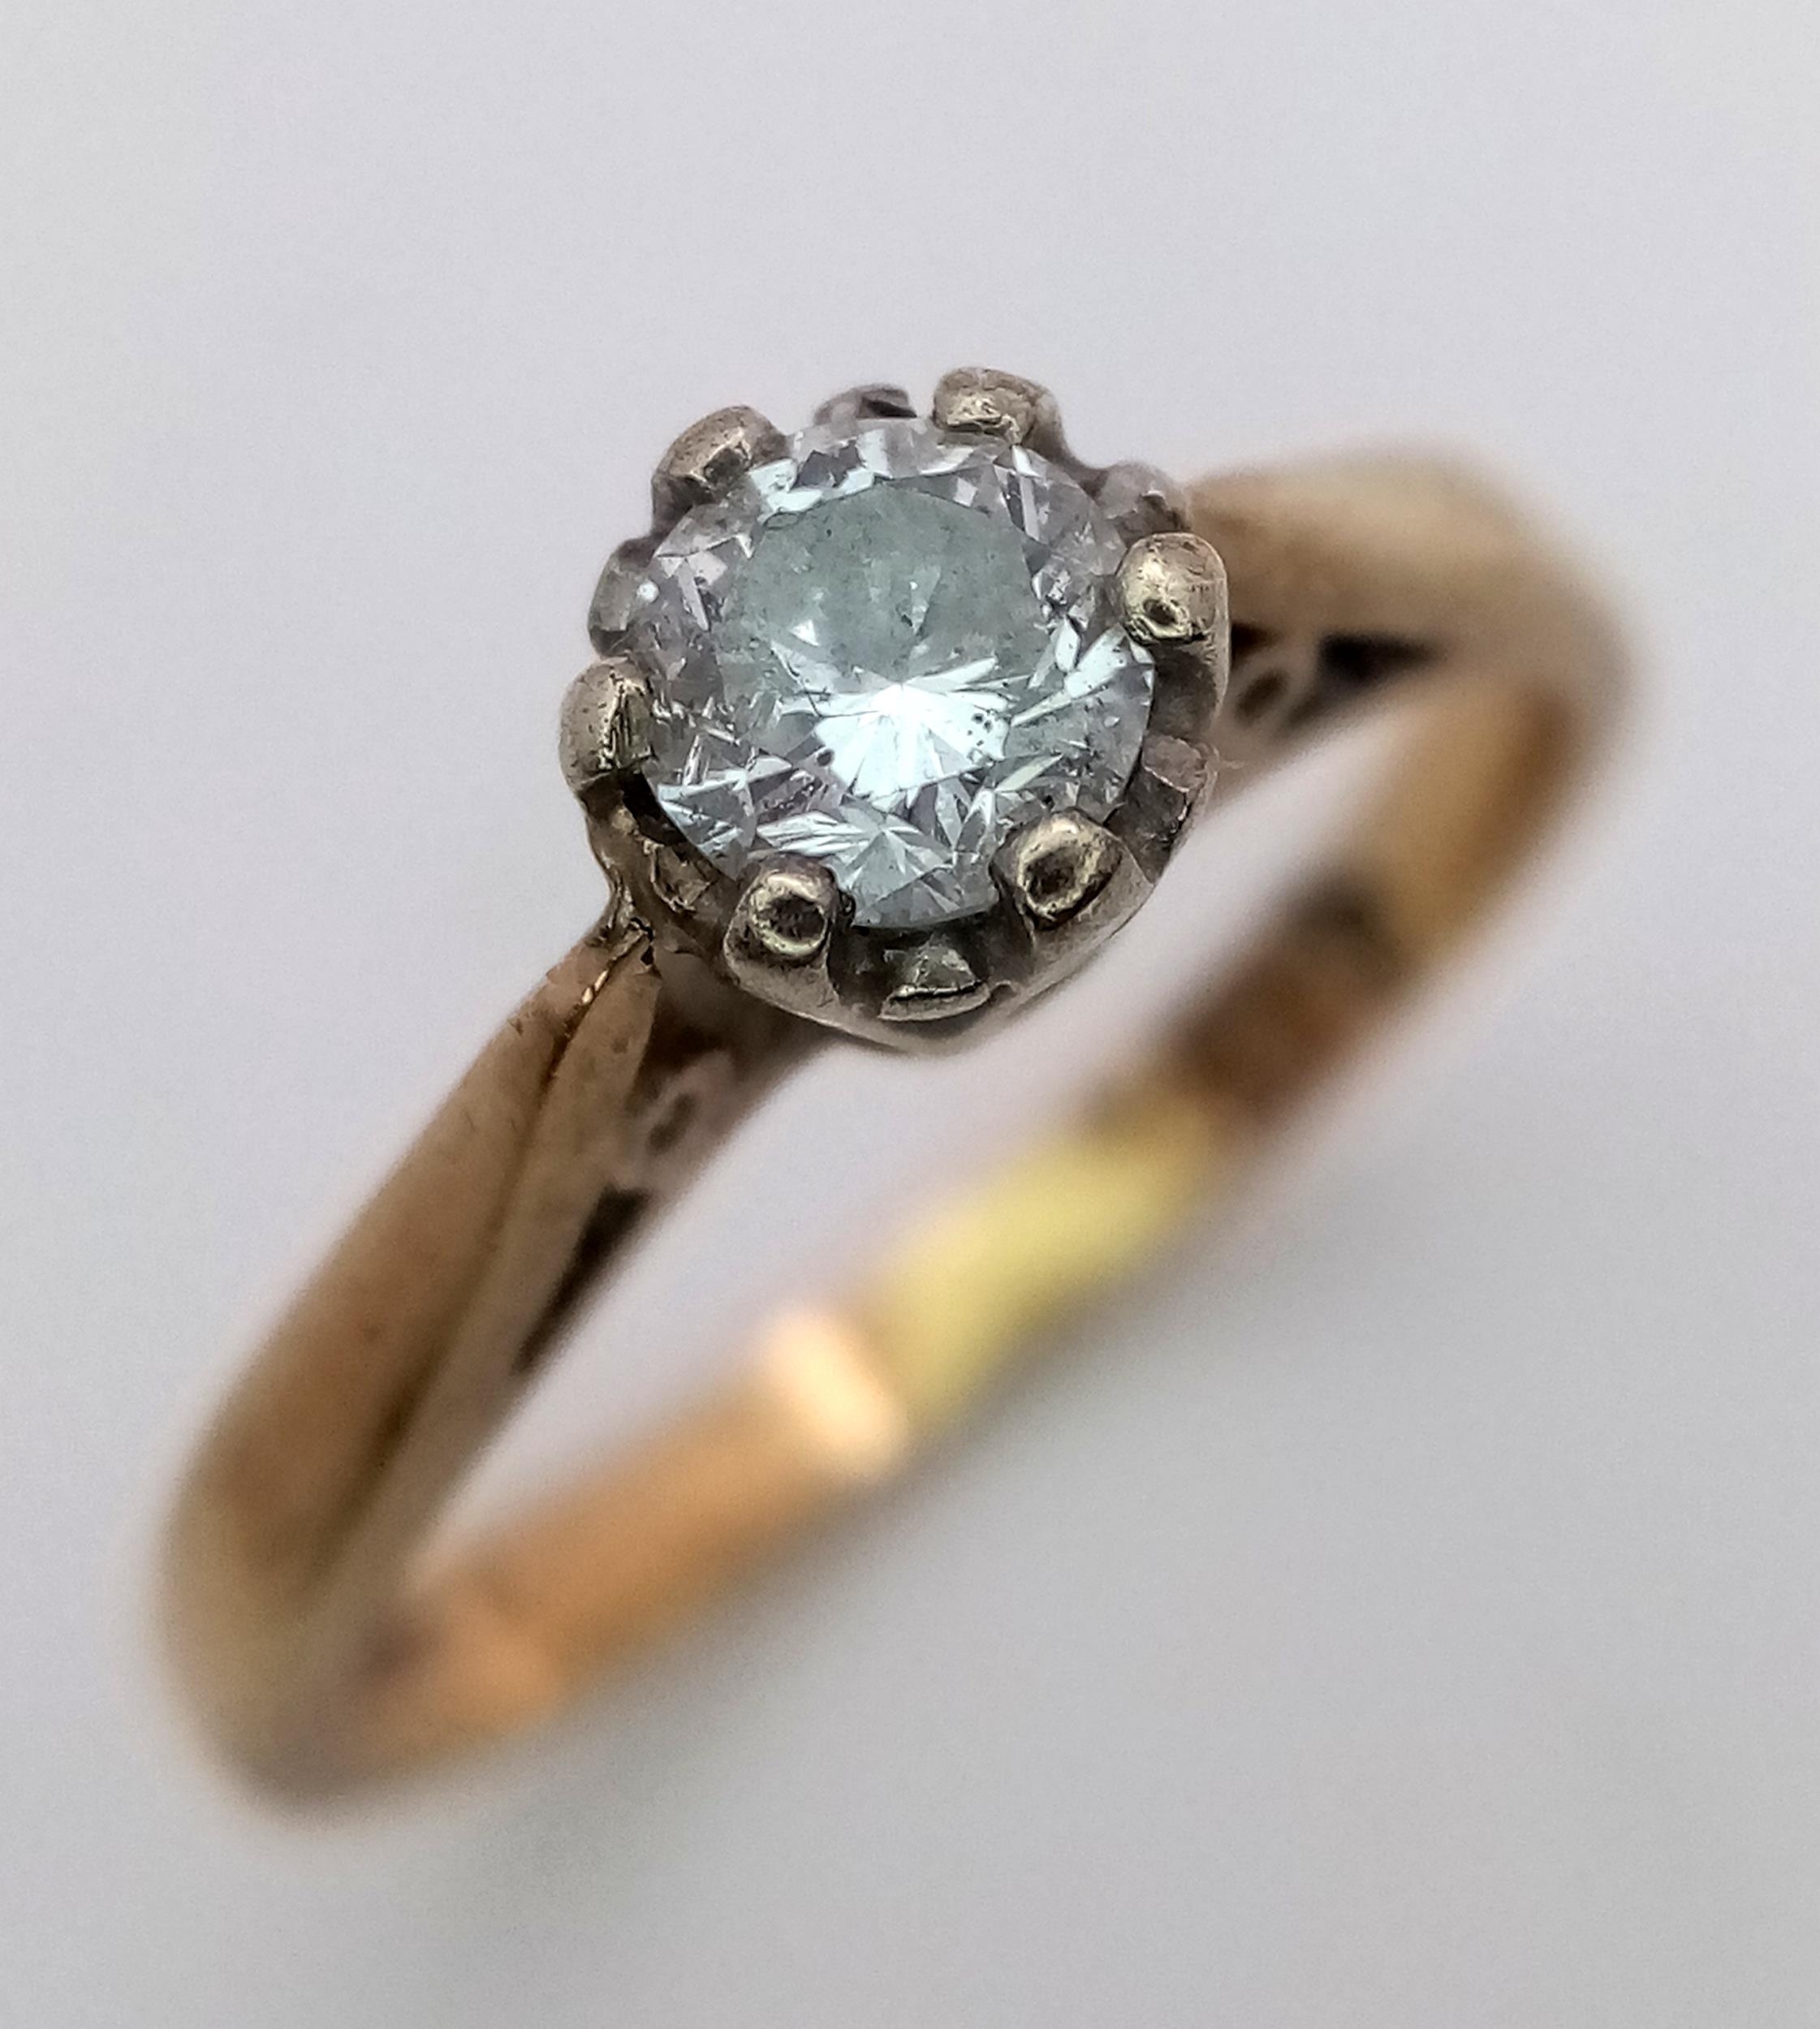 A 9K Yellow Gold Diamond Solitaire Ring. 0.25ct diamond. Size J. 2g total weight.